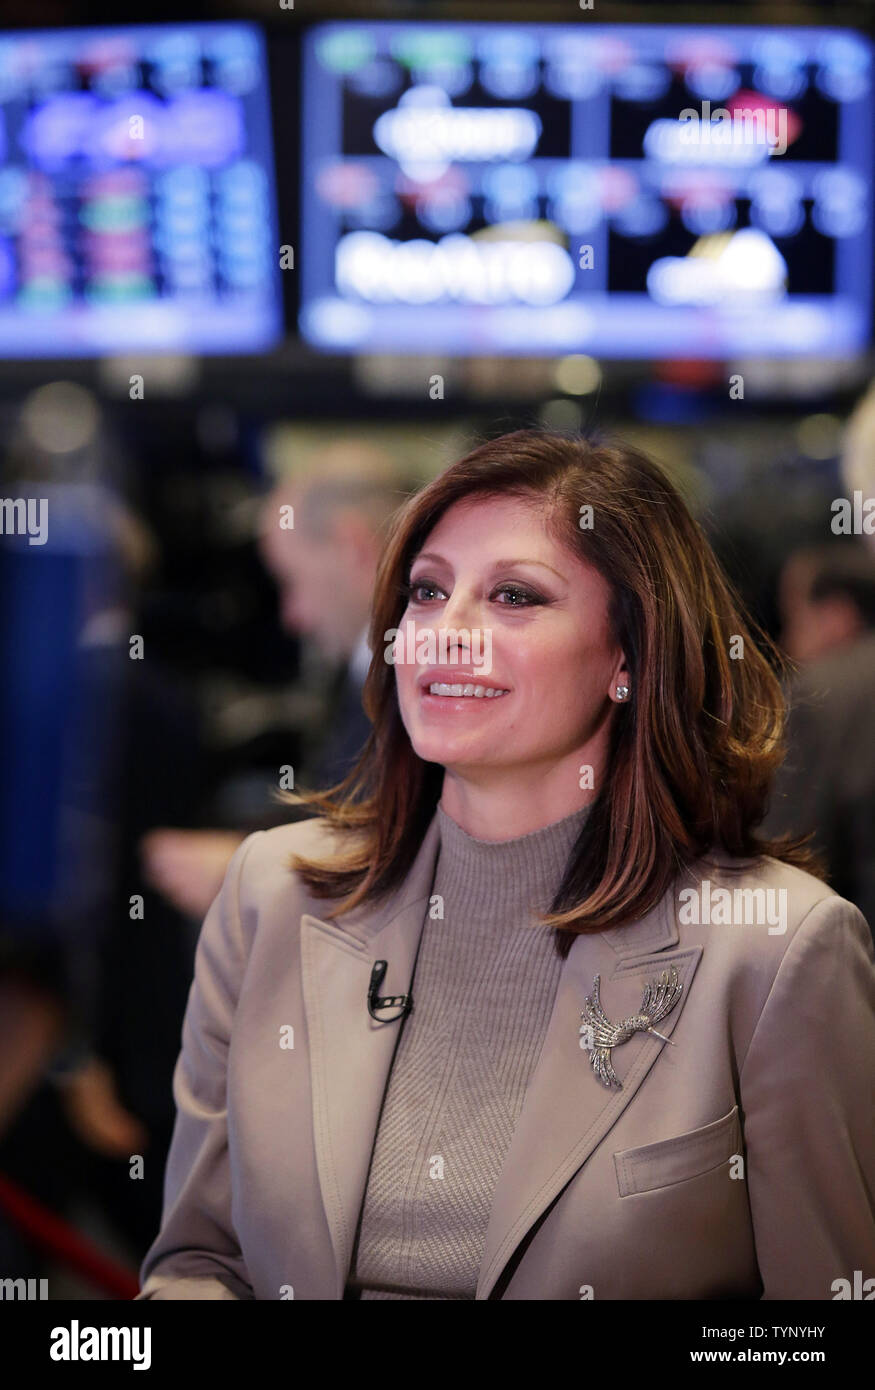 Maria Bartiromo does her CNBC broadcast from the floor of the NYSE before the closing bell on Wall Street In New York City on November 19, 2013. Maria Bartiromo, the financial journalist known as the 'Money Honey,' is leaving CNBC after 2 decades and is expected to join up with Fox.   UPI/John Angelillo Stock Photo